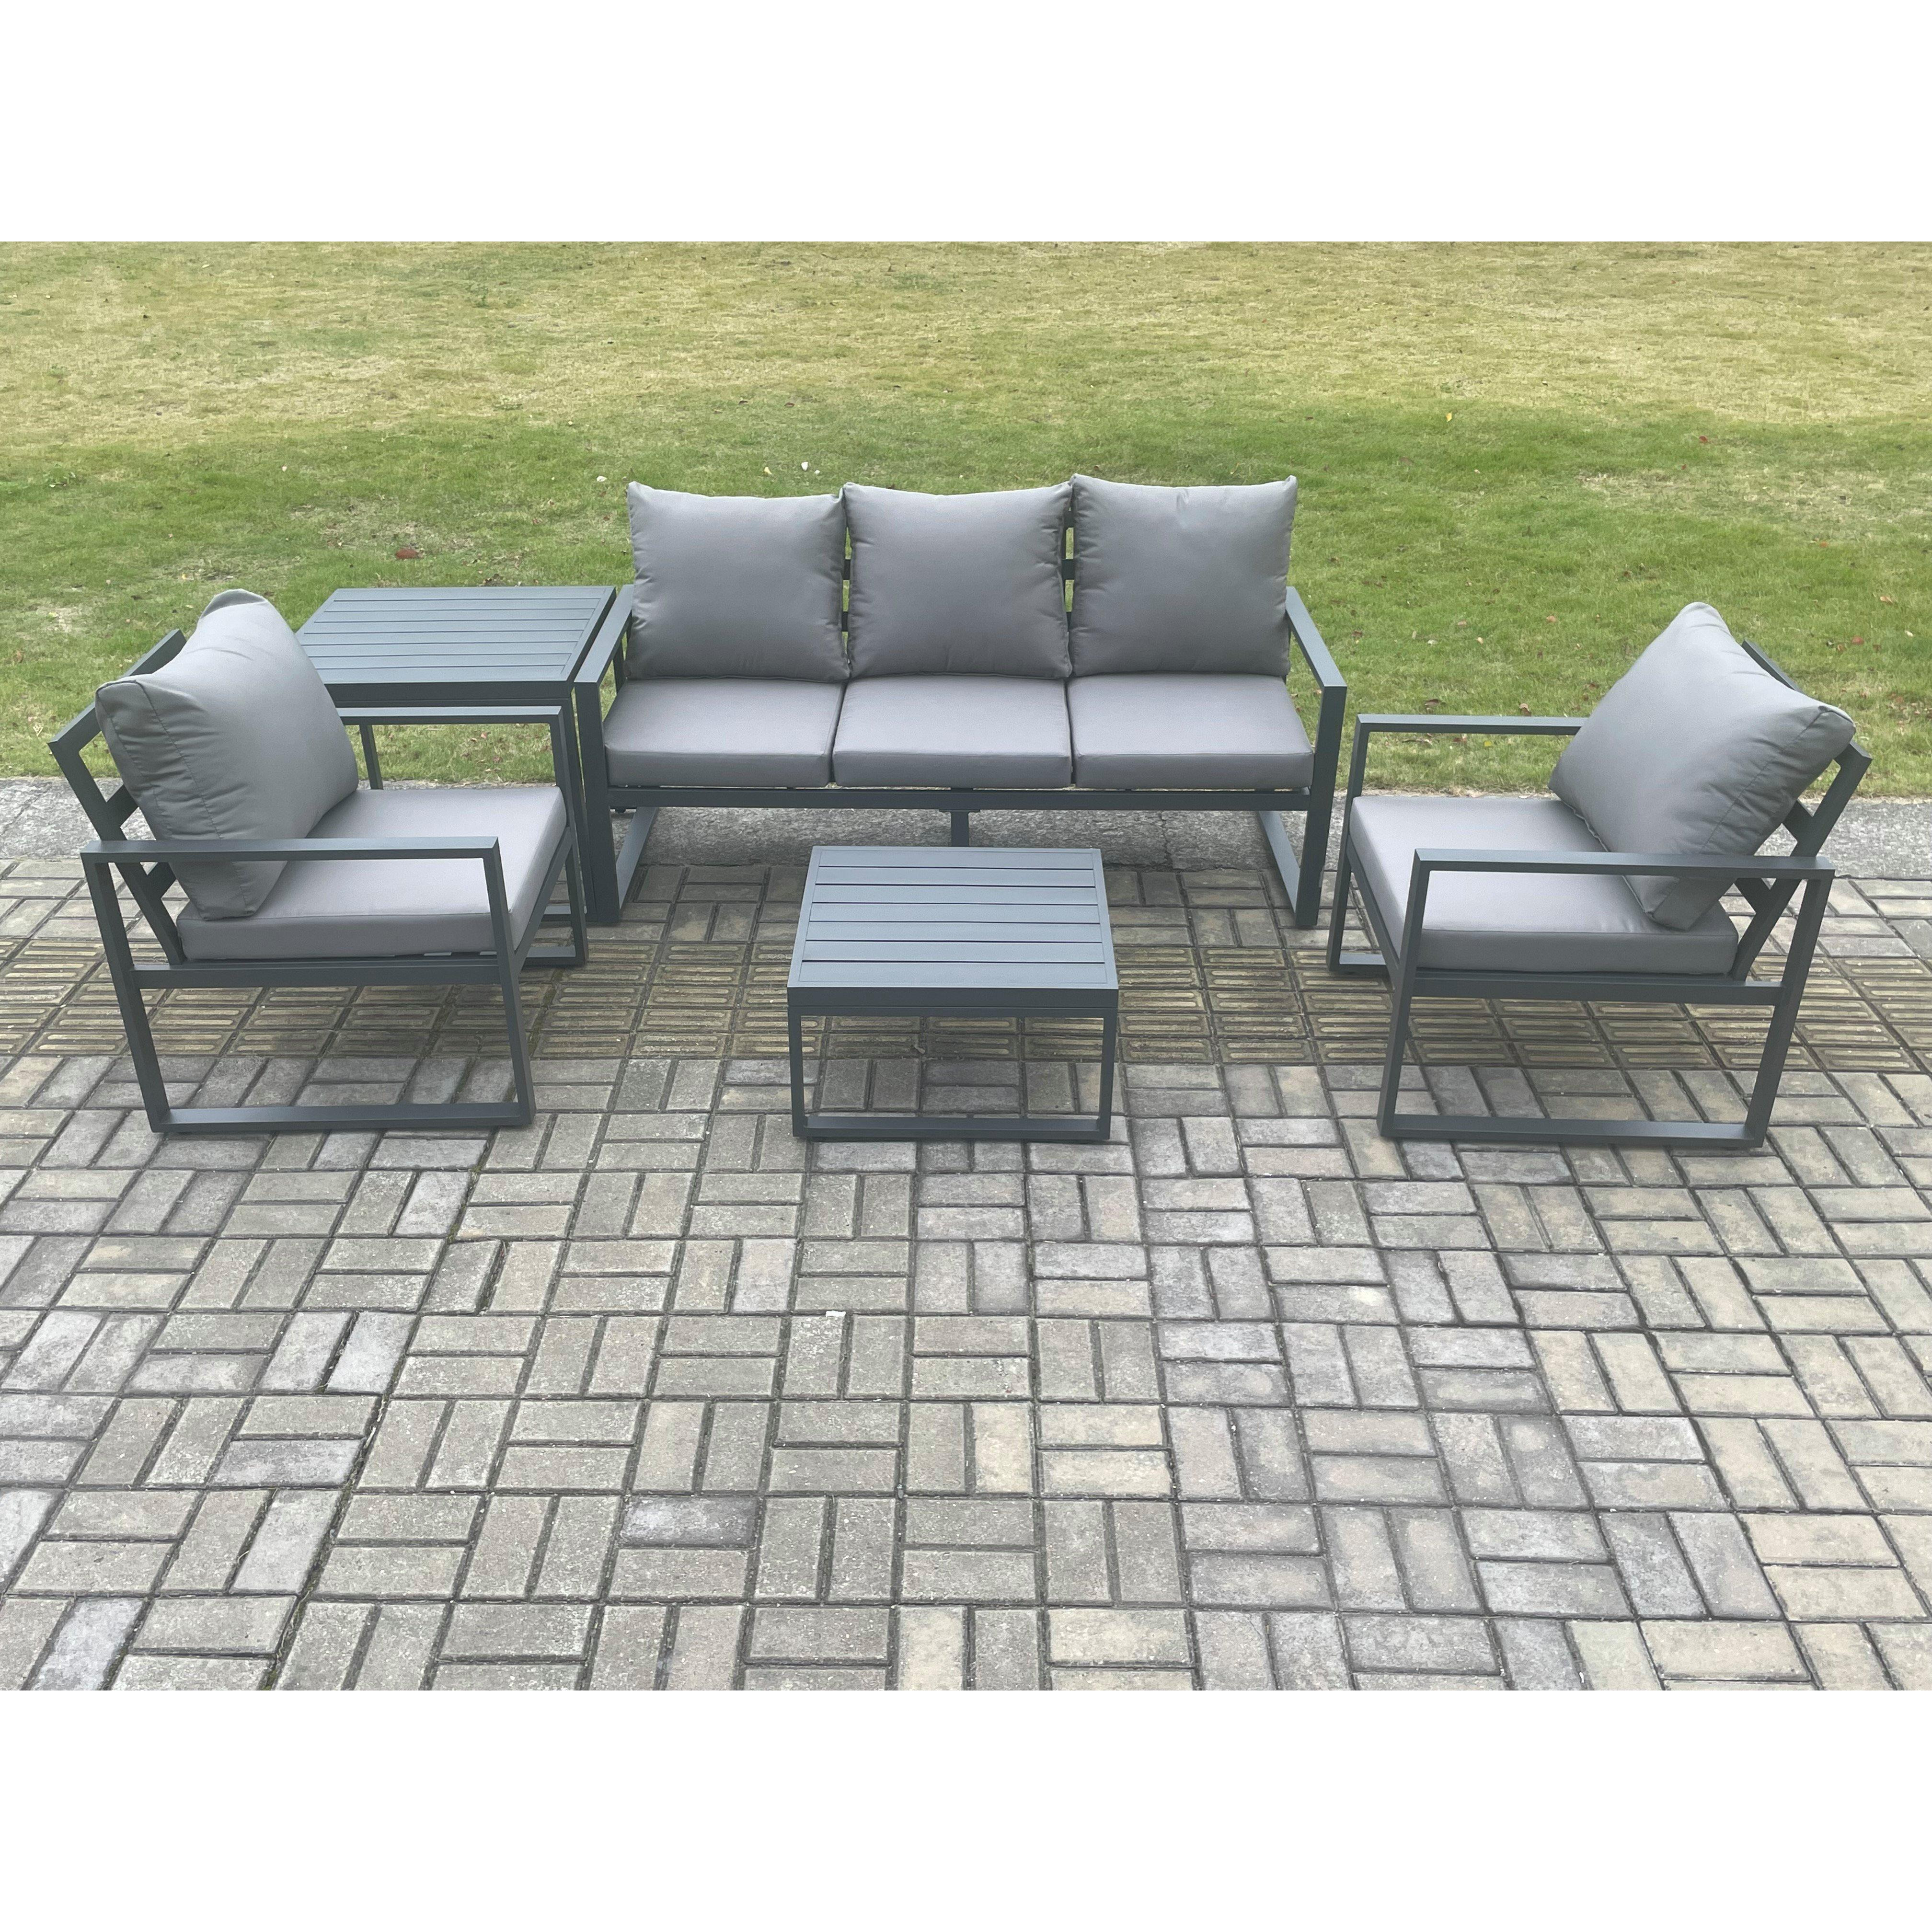 Aluminium Outdoor Garden Furniture Set Lounge Sofa 2 PC Chairs Square Coffee Table Sets with Side Table Dark Grey - image 1